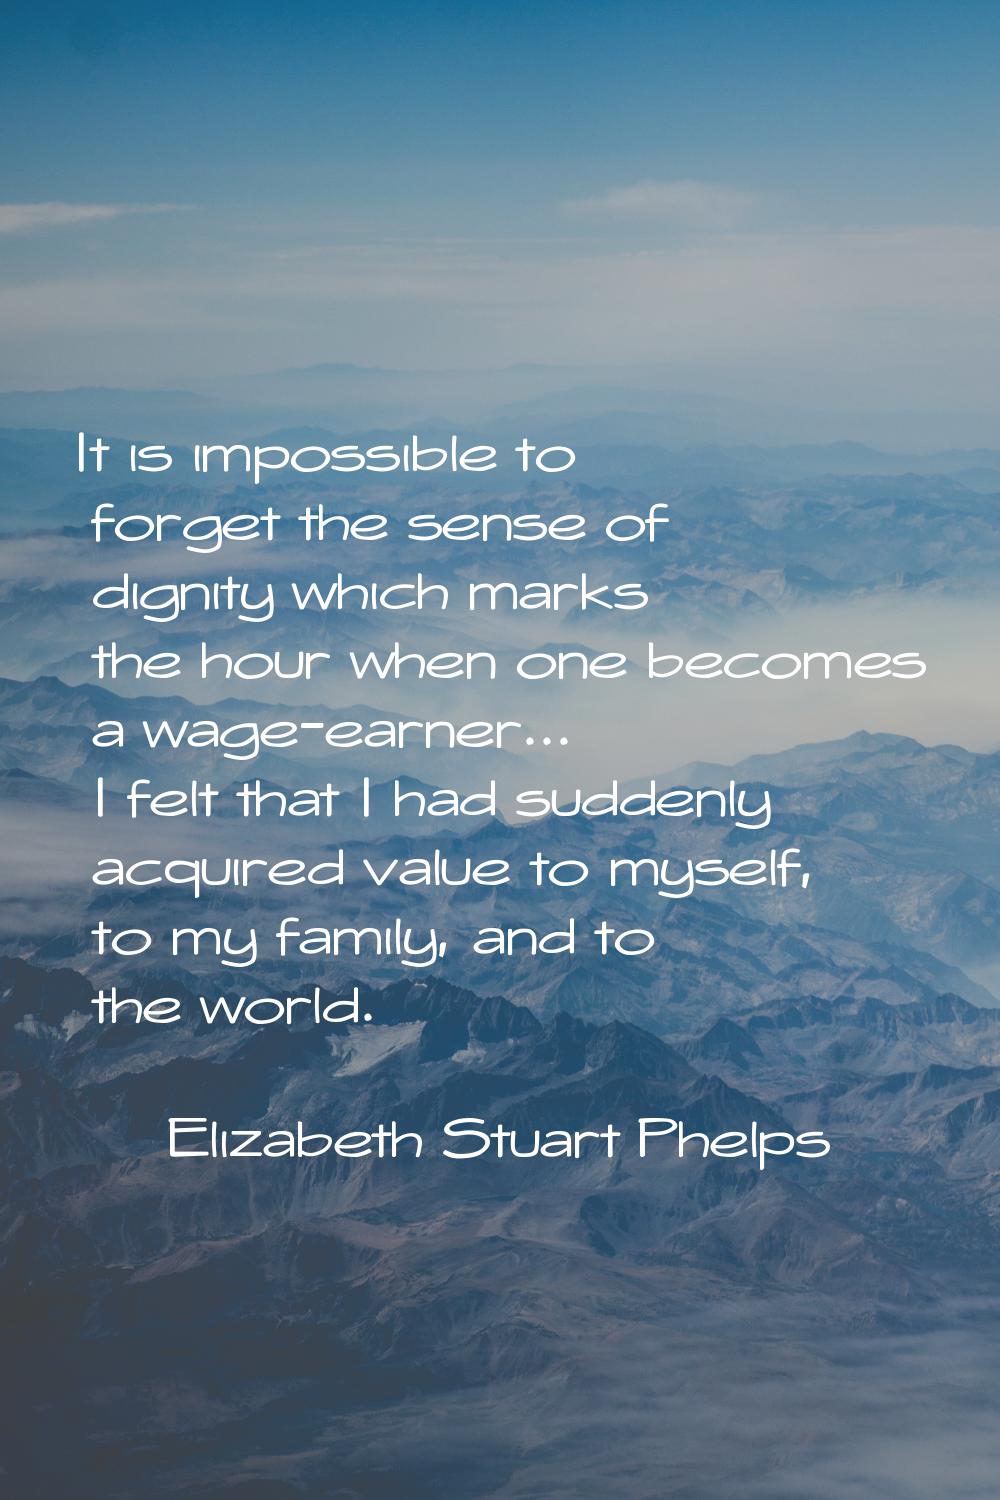 It is impossible to forget the sense of dignity which marks the hour when one becomes a wage-earner